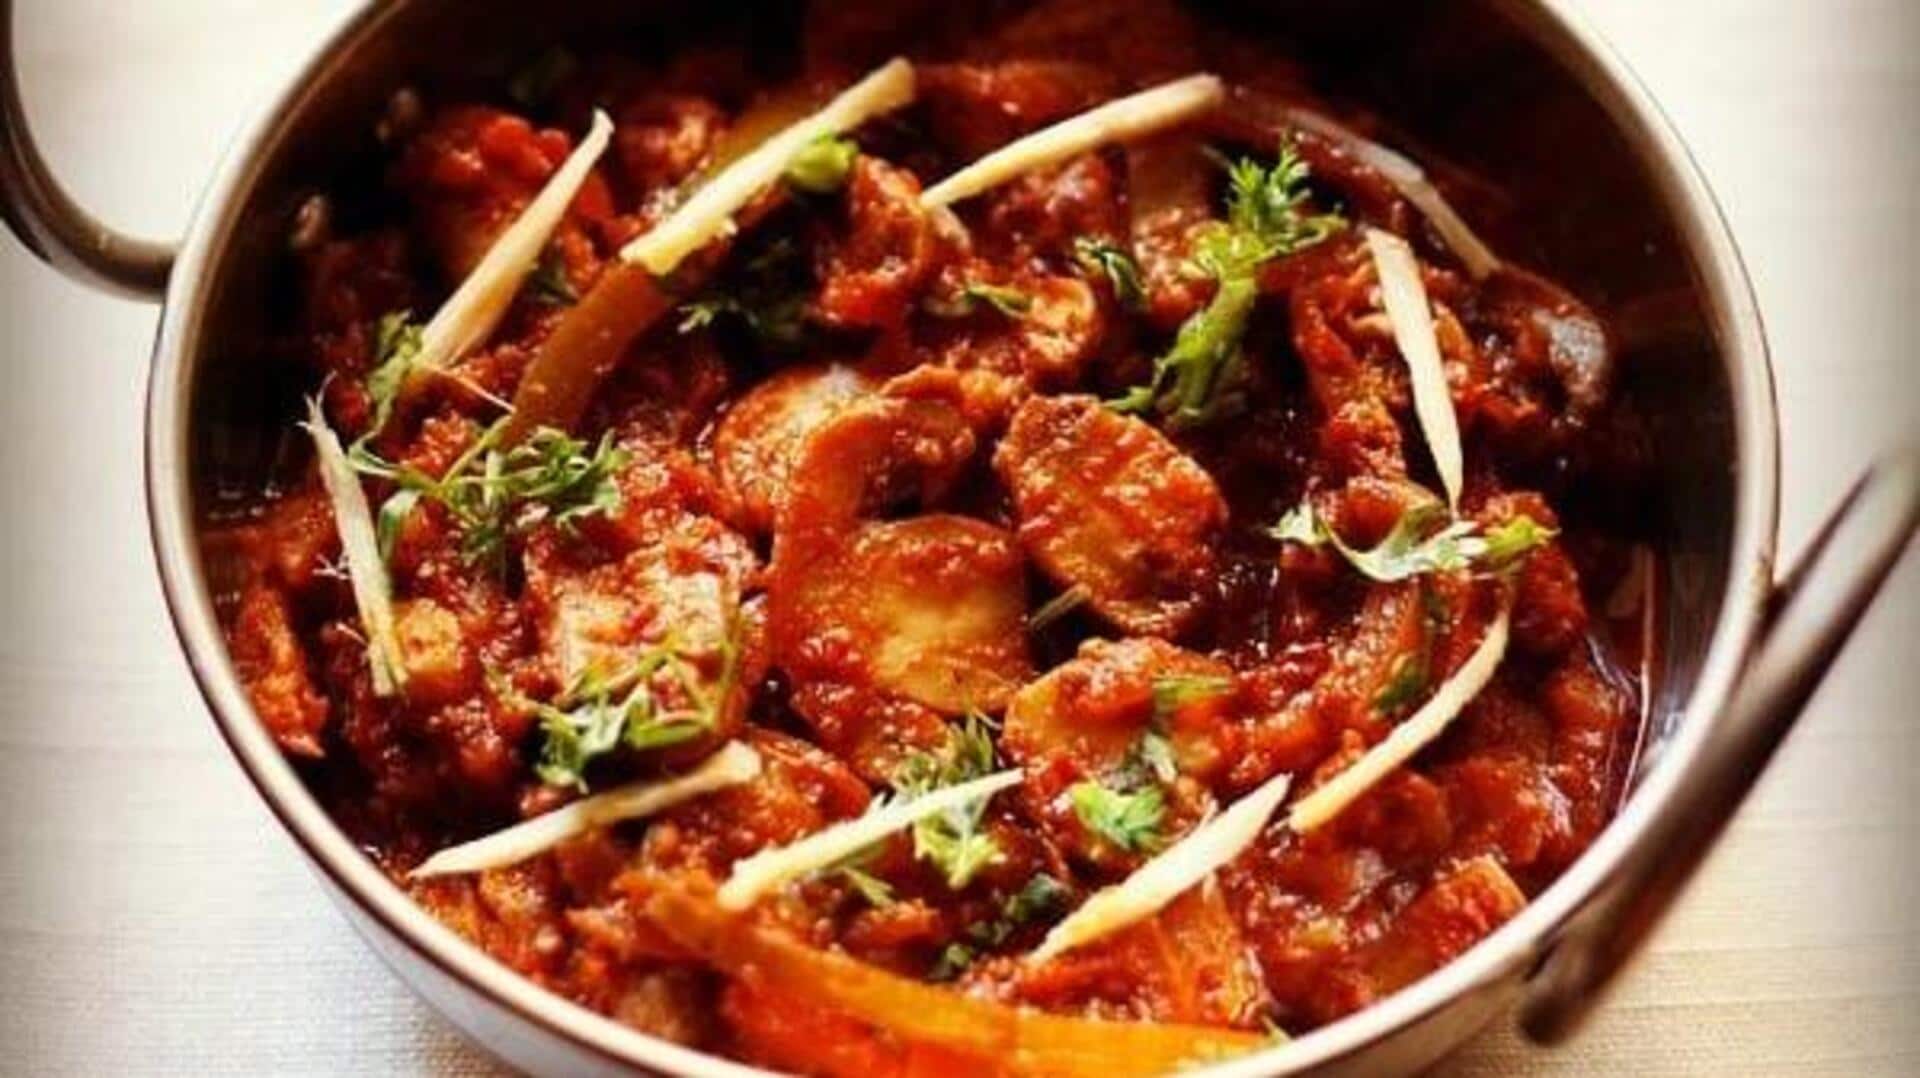 Spice up your day with this kadai mushroom recipe